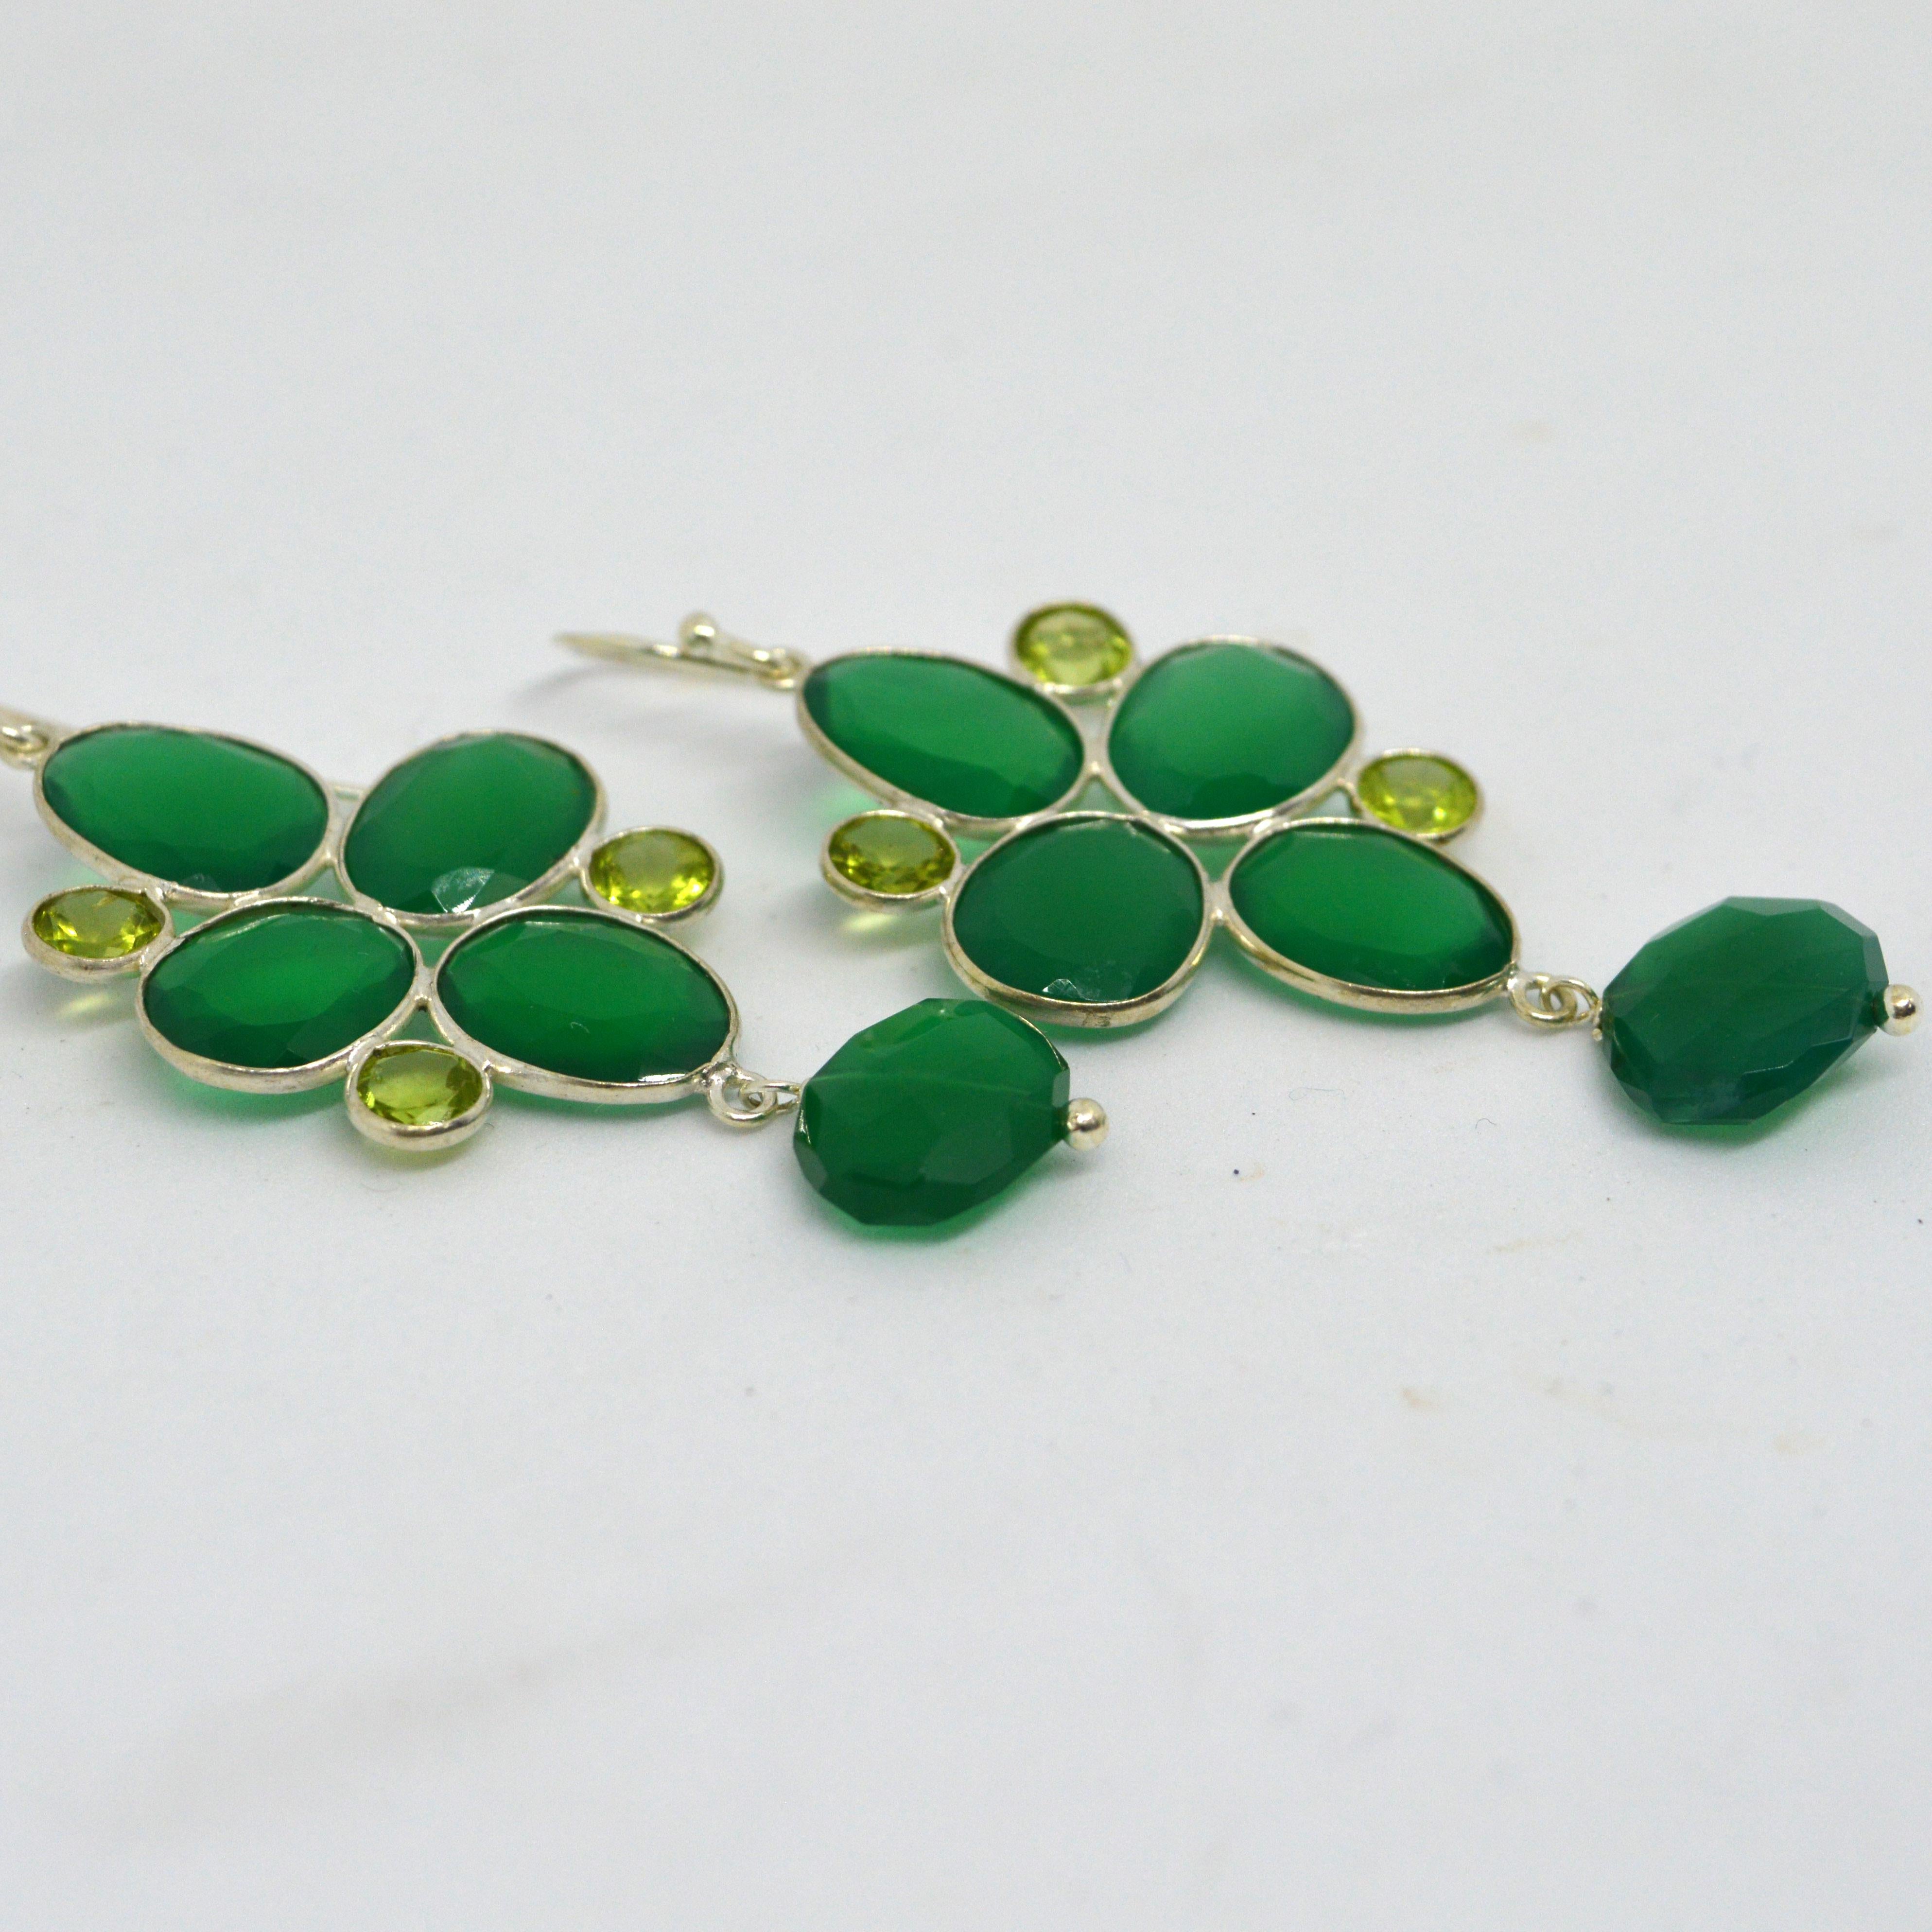 Contemporary Decadent Jewels Peridot Green Onyx Sterling Silver Earrings